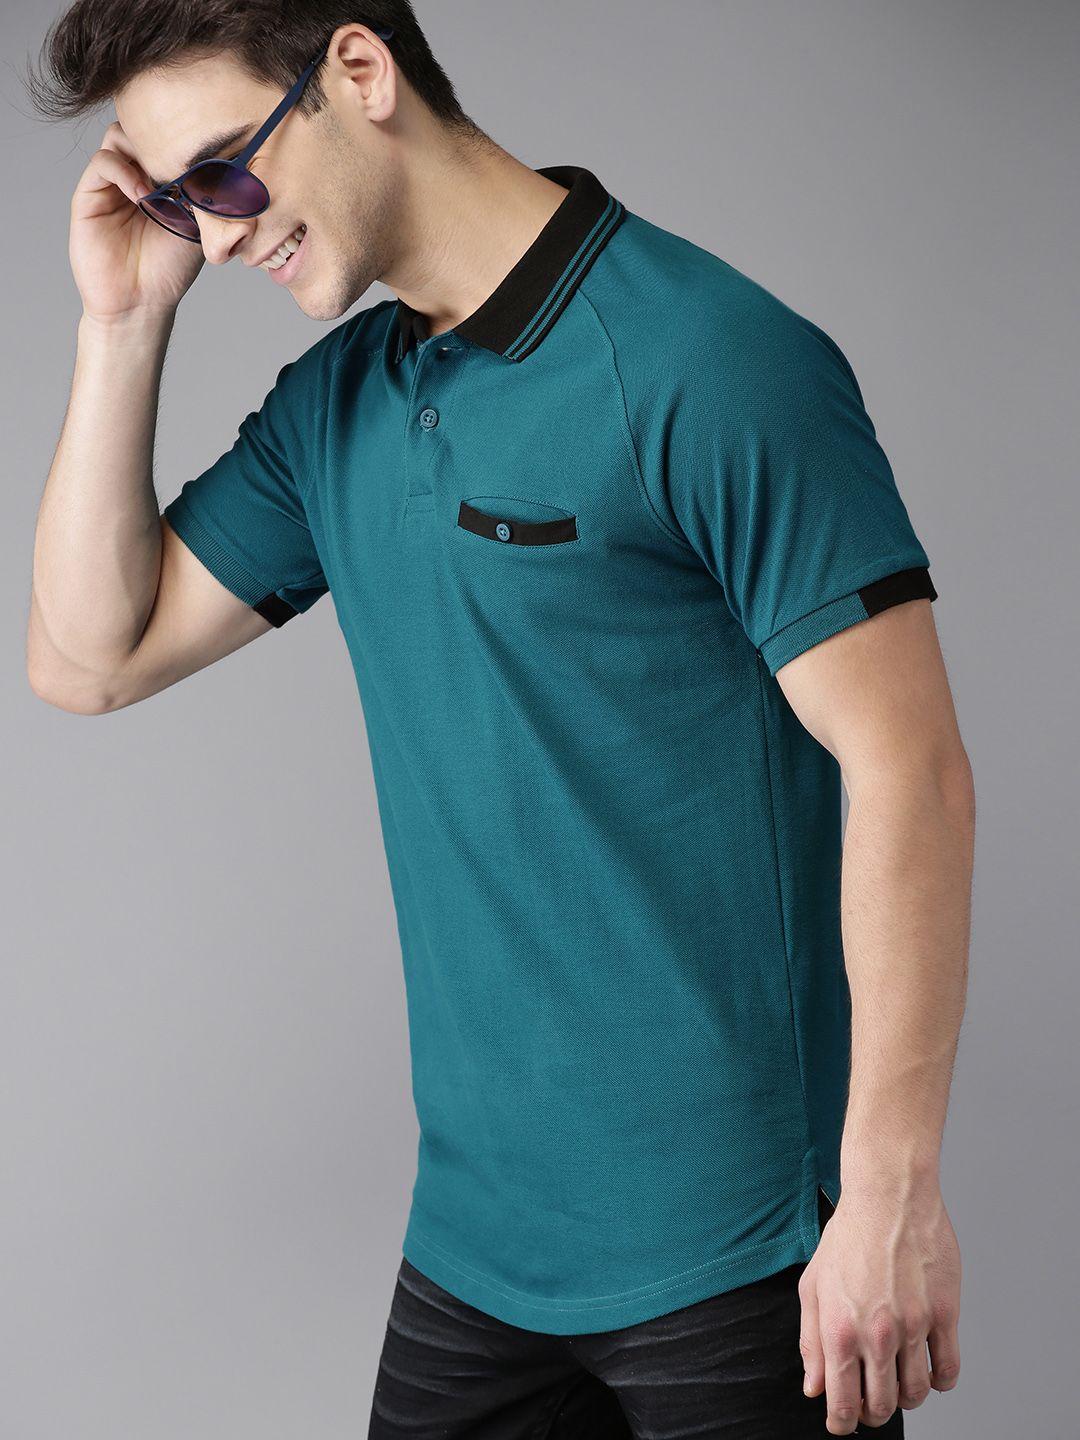 here&now-men-teal-blue-solid-polo-collar-t-shirt